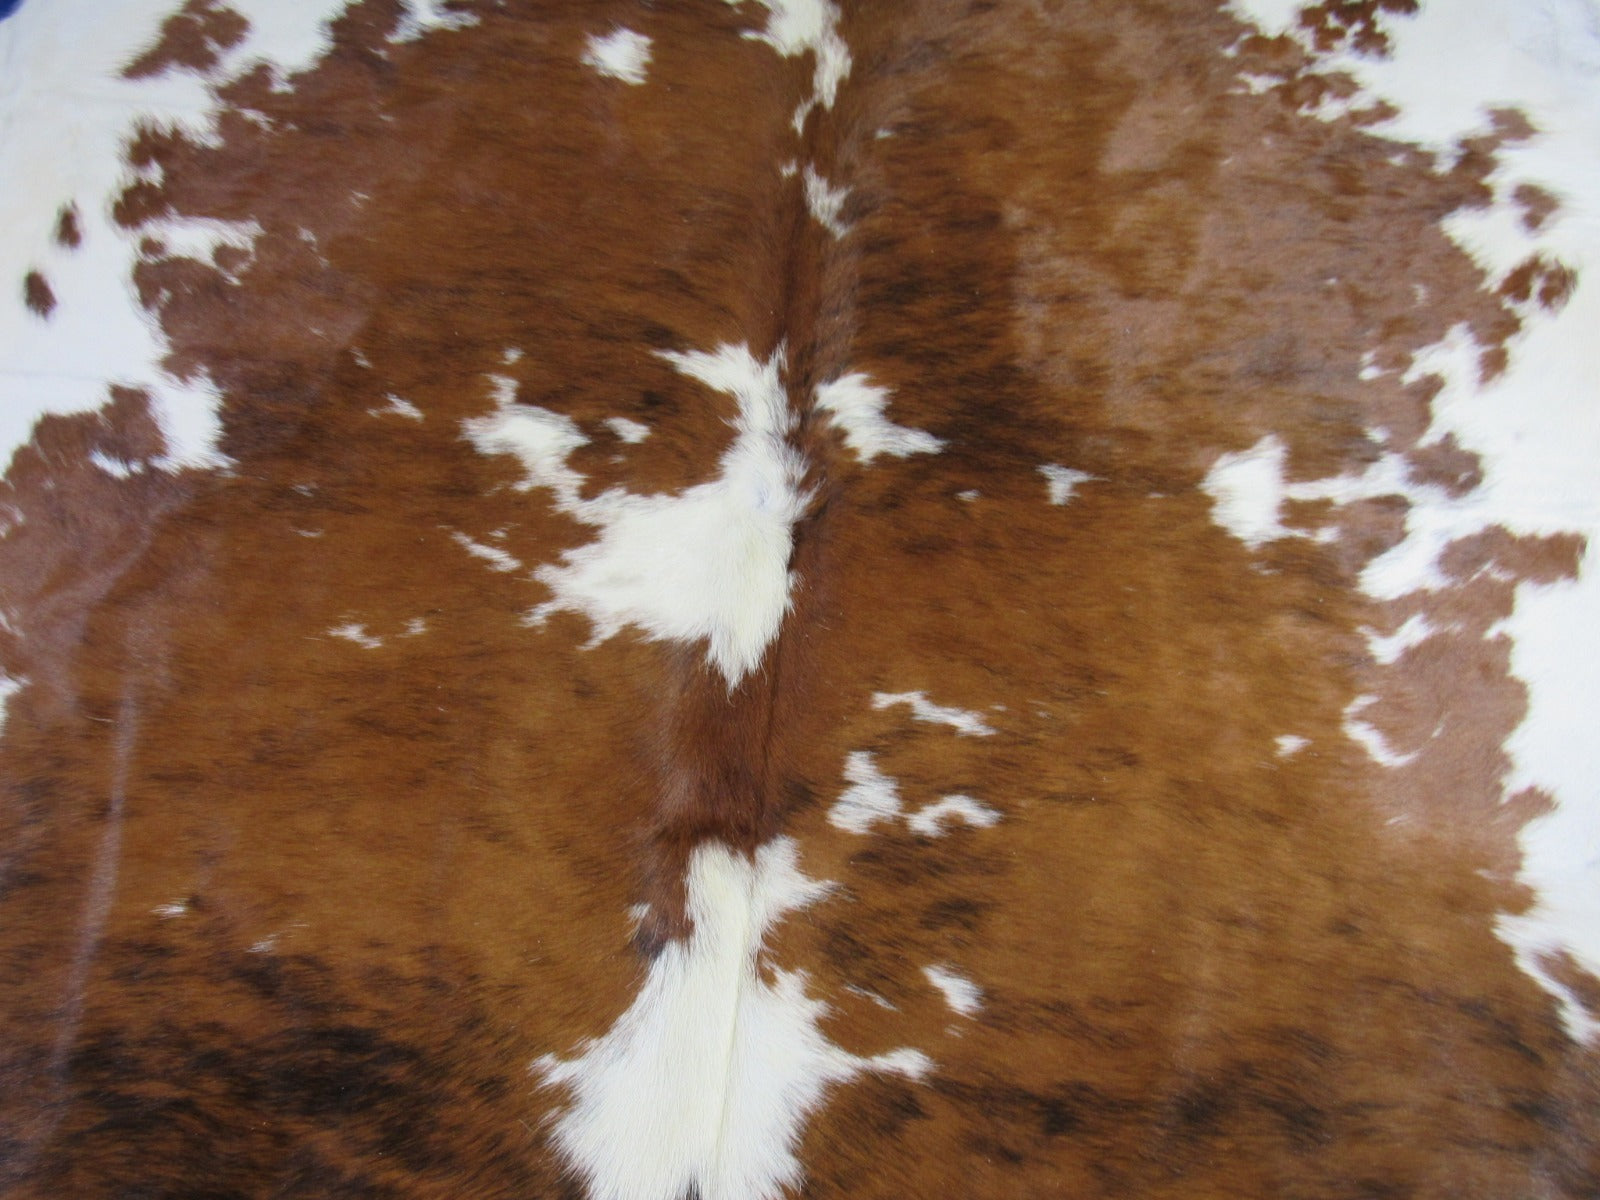 Tricolor Speckled Cowhide Rug - Size: 7.2x7 feet K-326